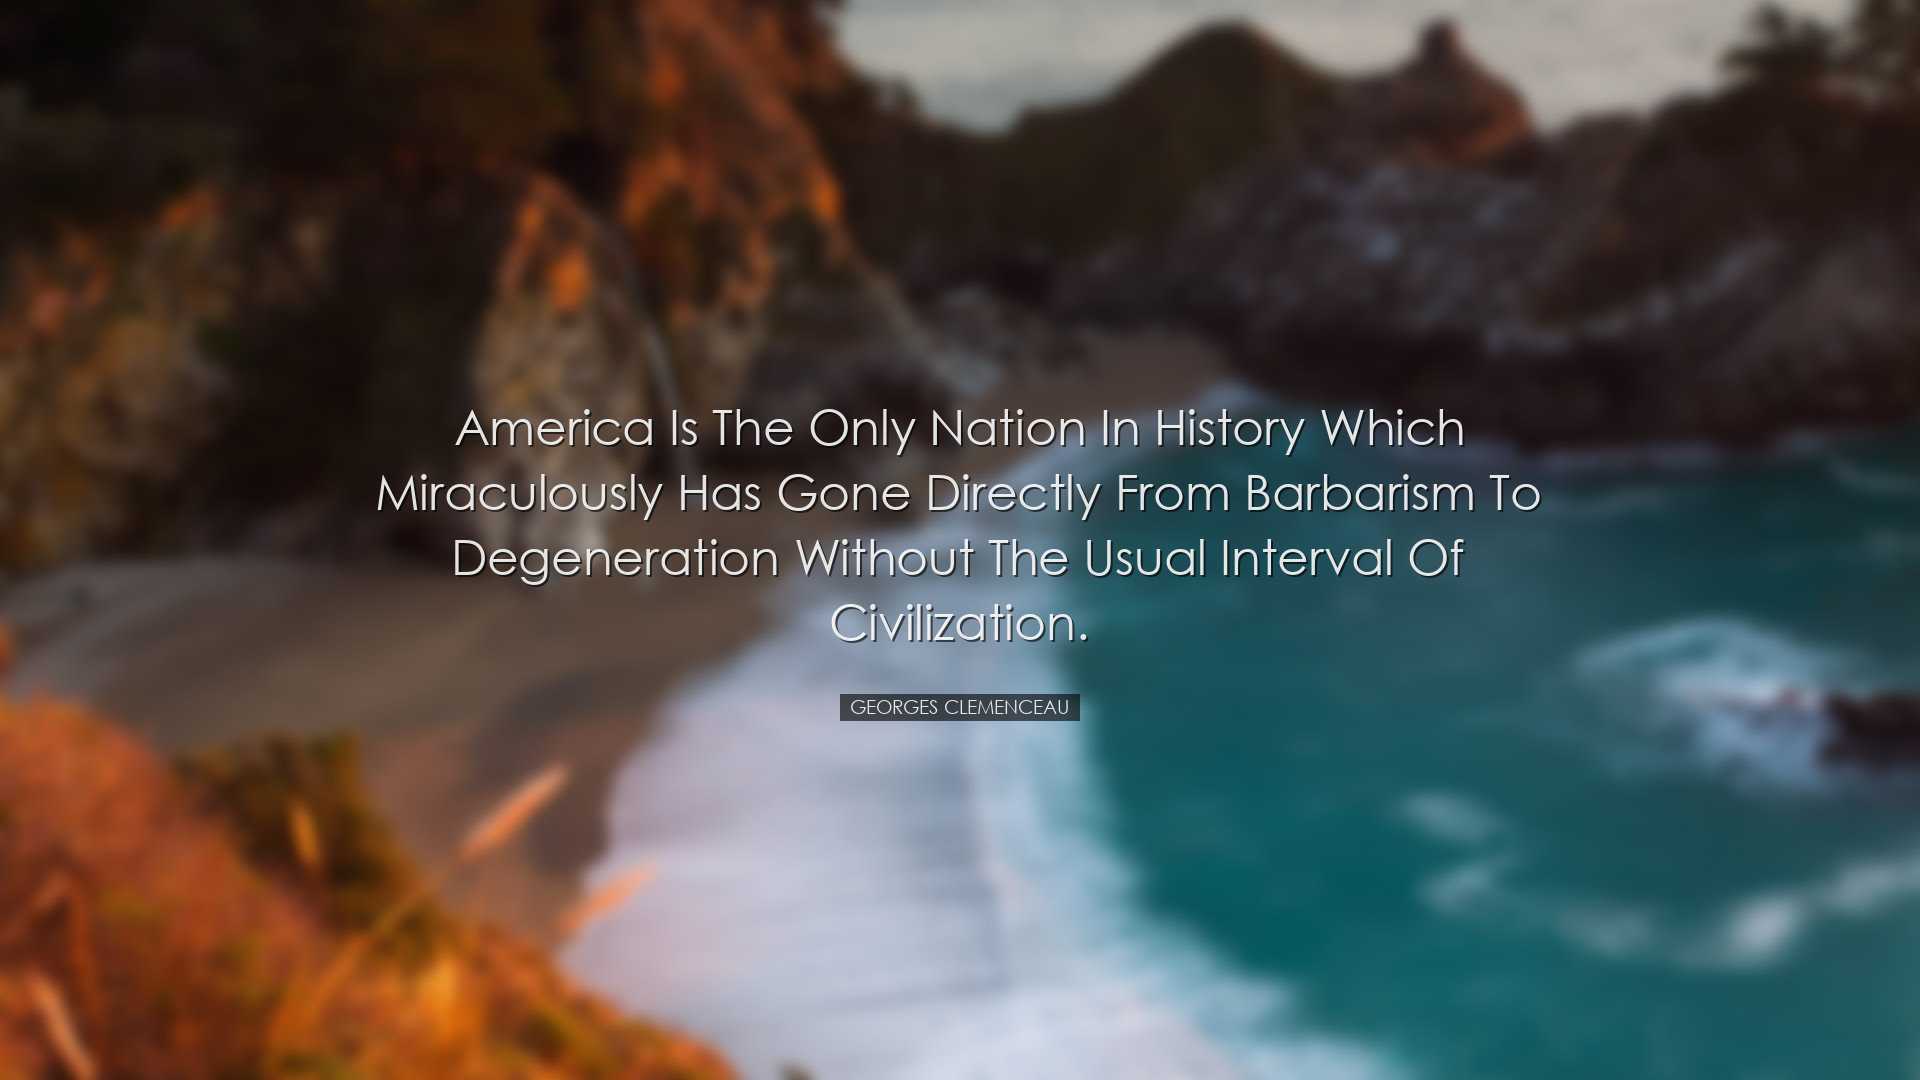 America is the only nation in history which miraculously has gone